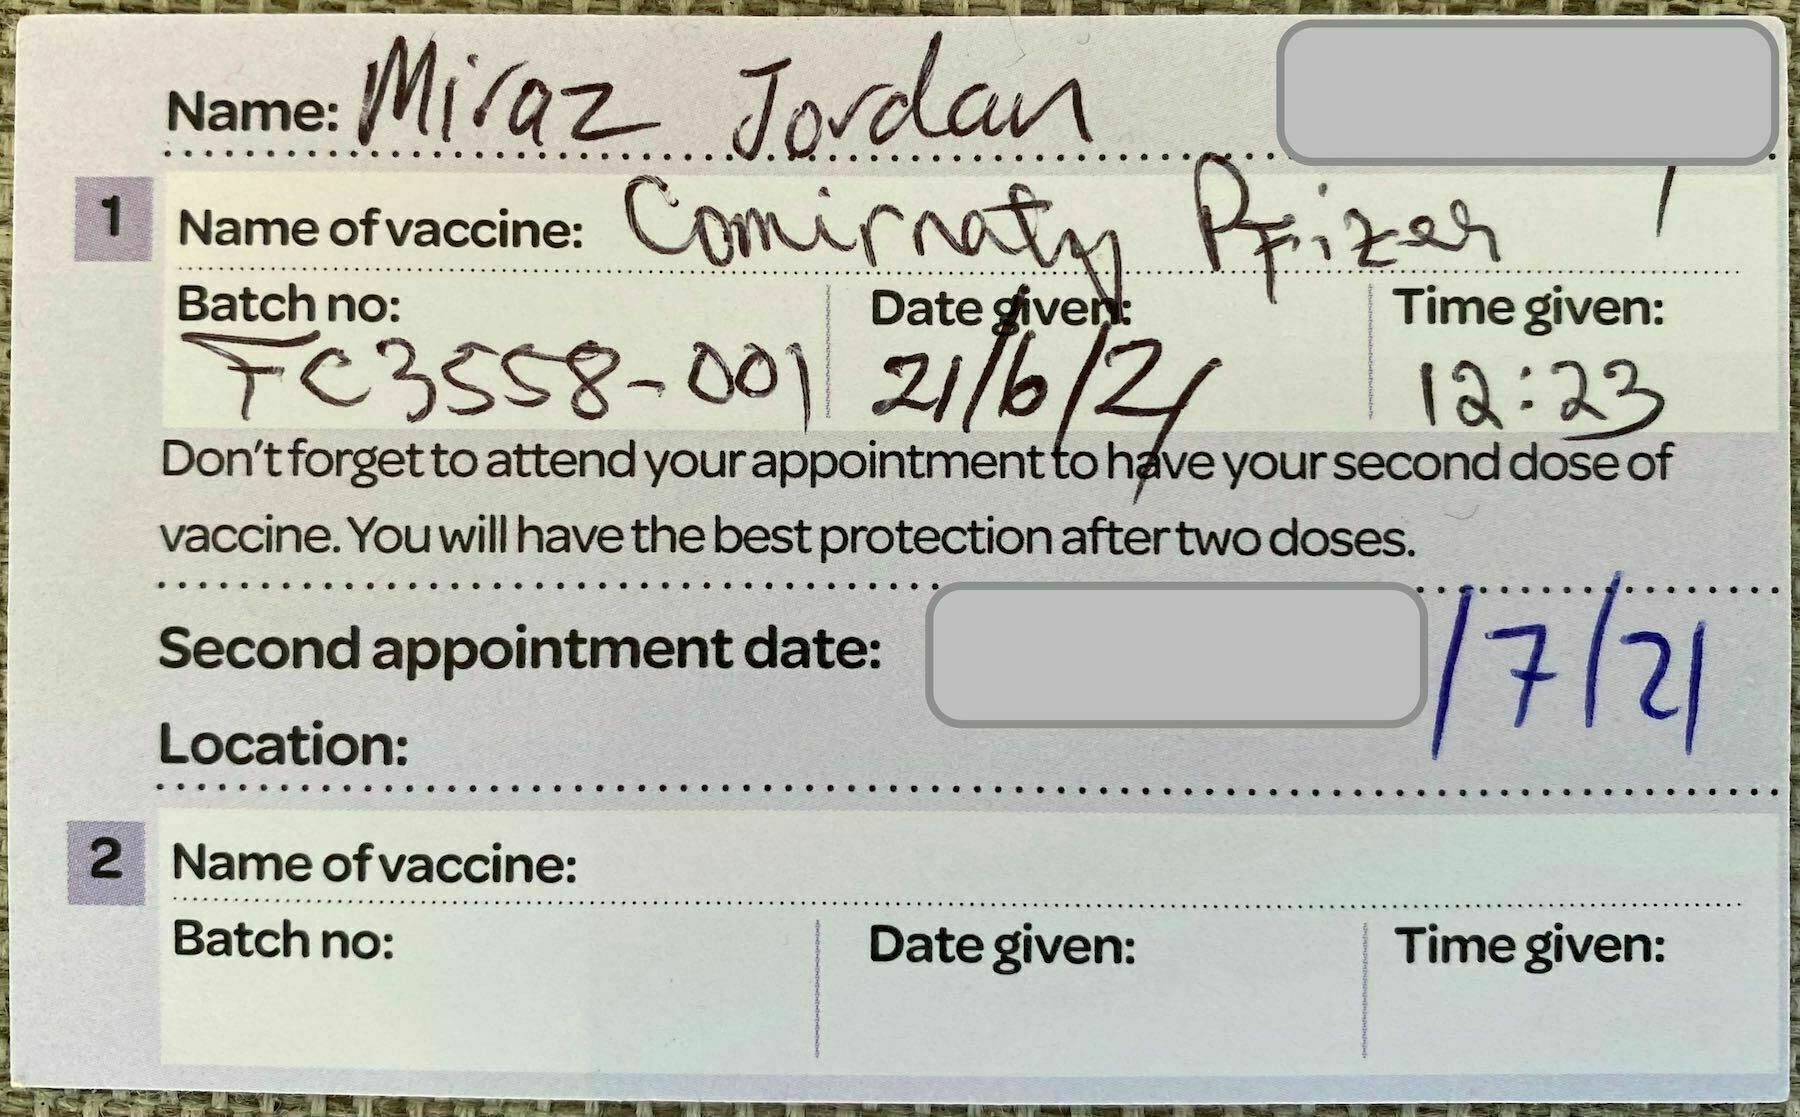 Vaccination card. 